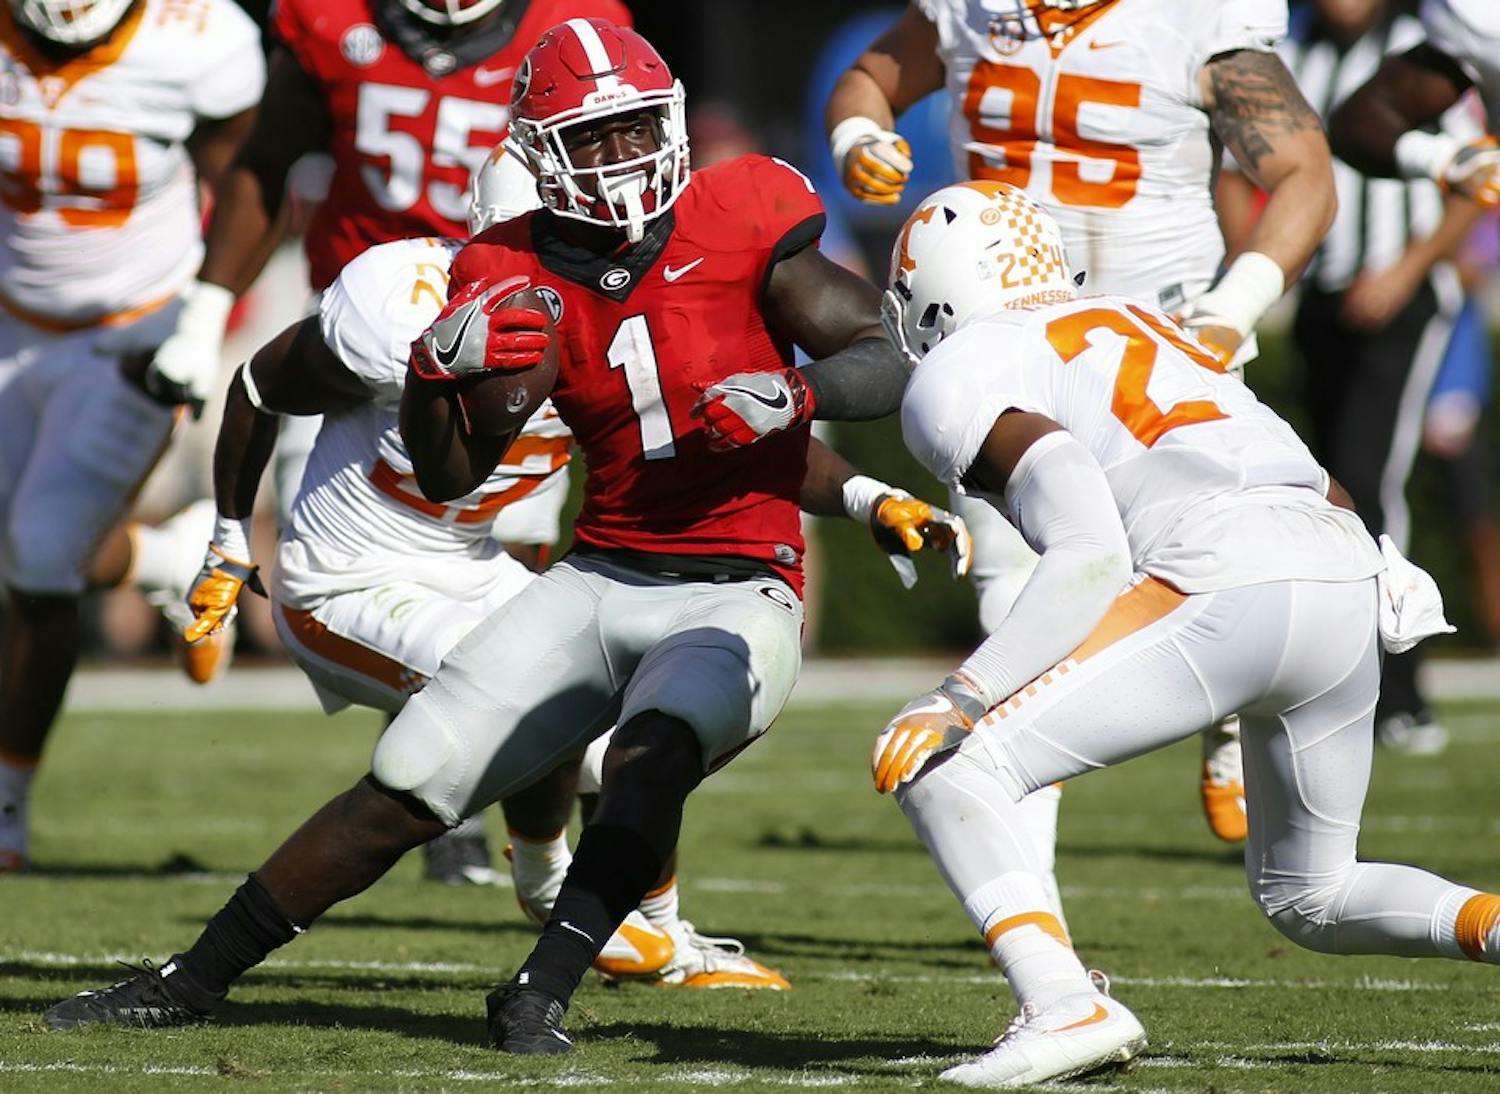 Georgia tailback Sony Michel (1) jukes to avoid a tackle from Tennessee defensive back Todd Kelly Jr. (24) during the first half of a NCAA college football game between Georgia and Tennessee, in Athens, Ga., on Saturday, October 1, 2016. (Joshua L. Jones/special)